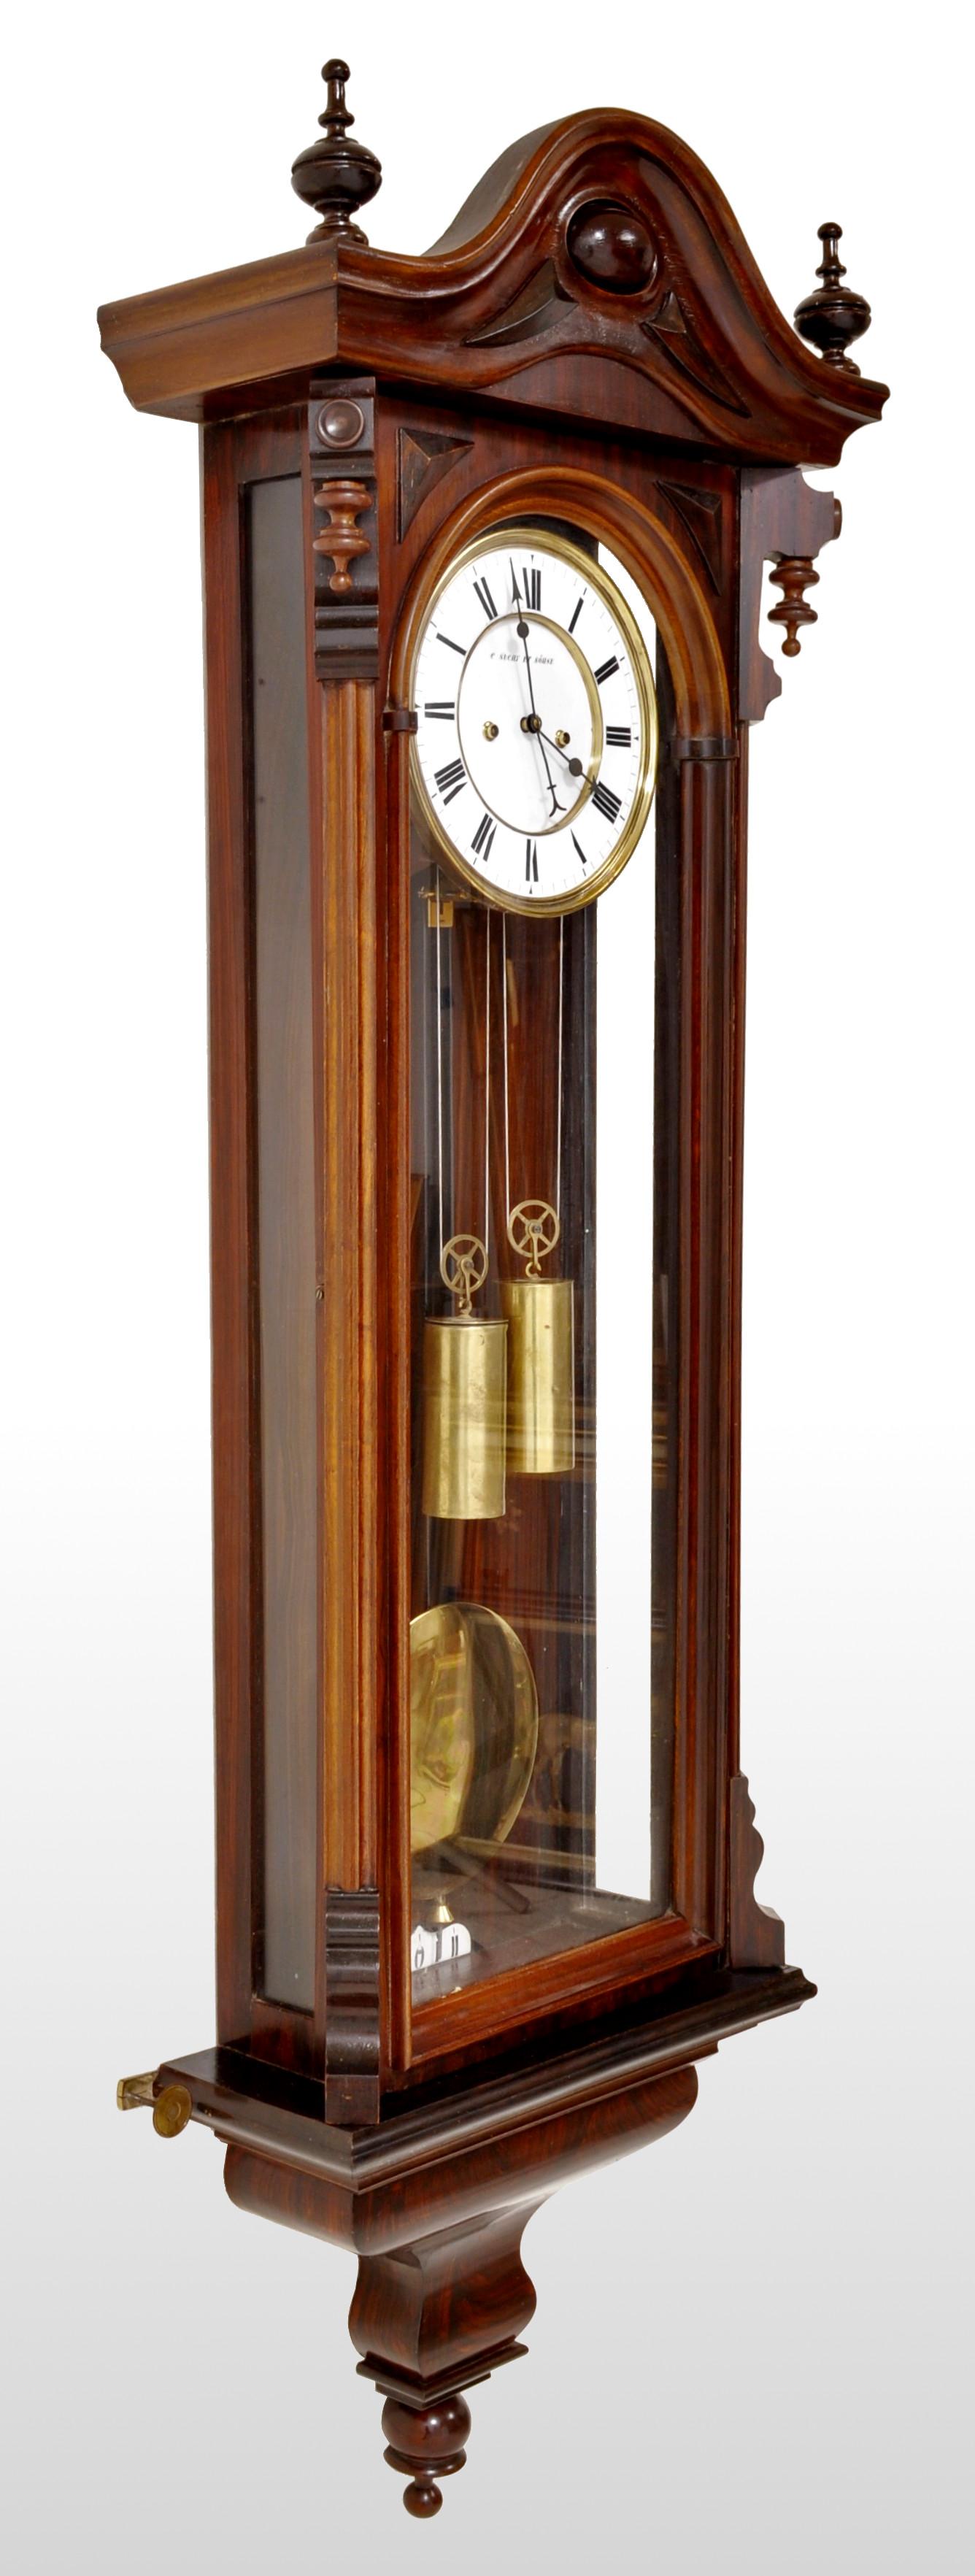 Antique Vienna 8-day time and strike regulator/clock by Carl Suchy & Söhne, circa 1890. A fine regulator in a mahogany case and in the Biedermeier style, the arched top flanked by a pair of turned finials with corresponding finials on the door and